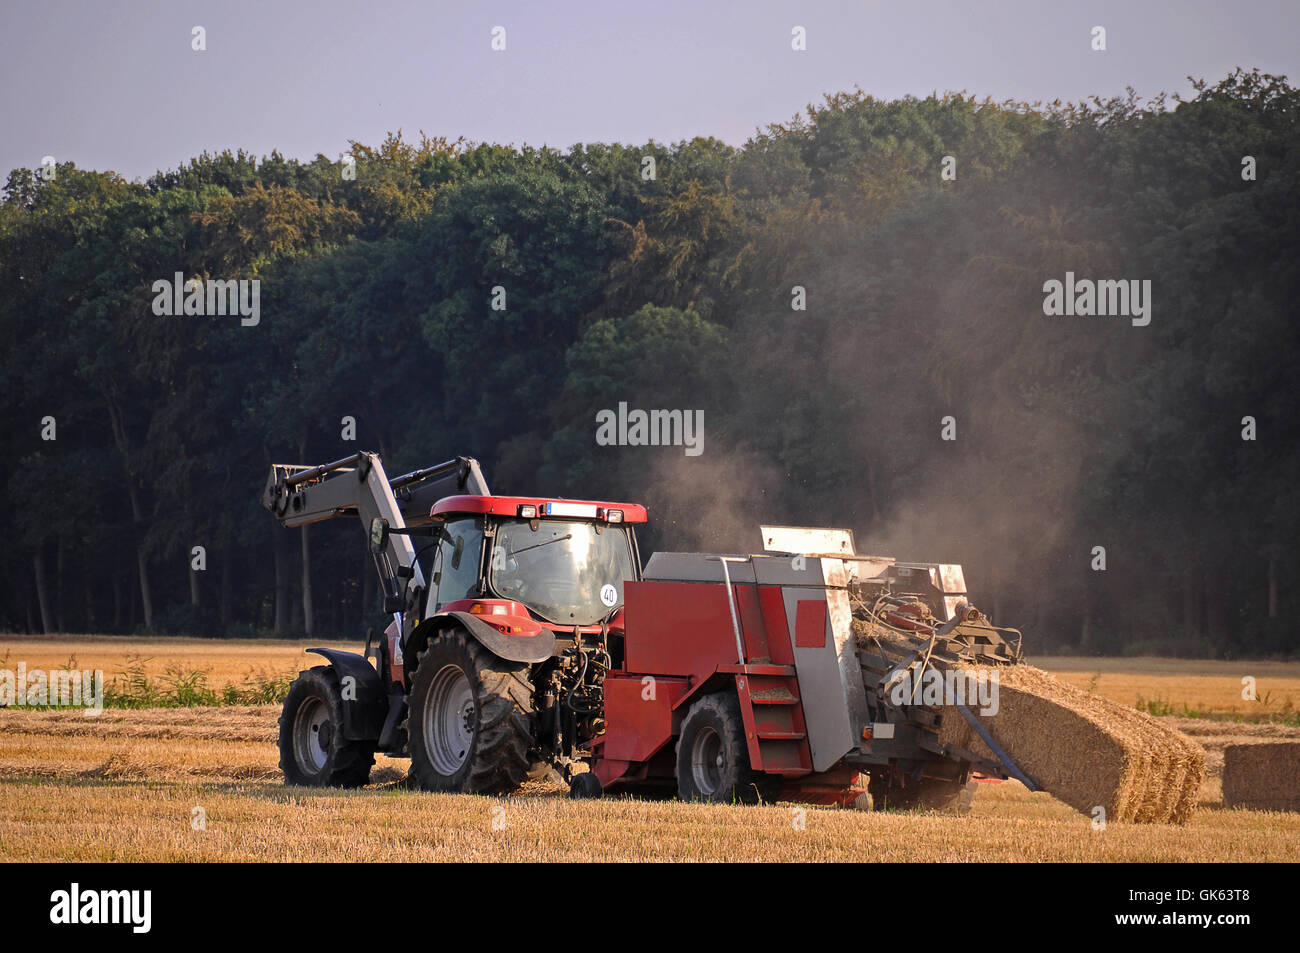 agriculture farming tractor Stock Photo